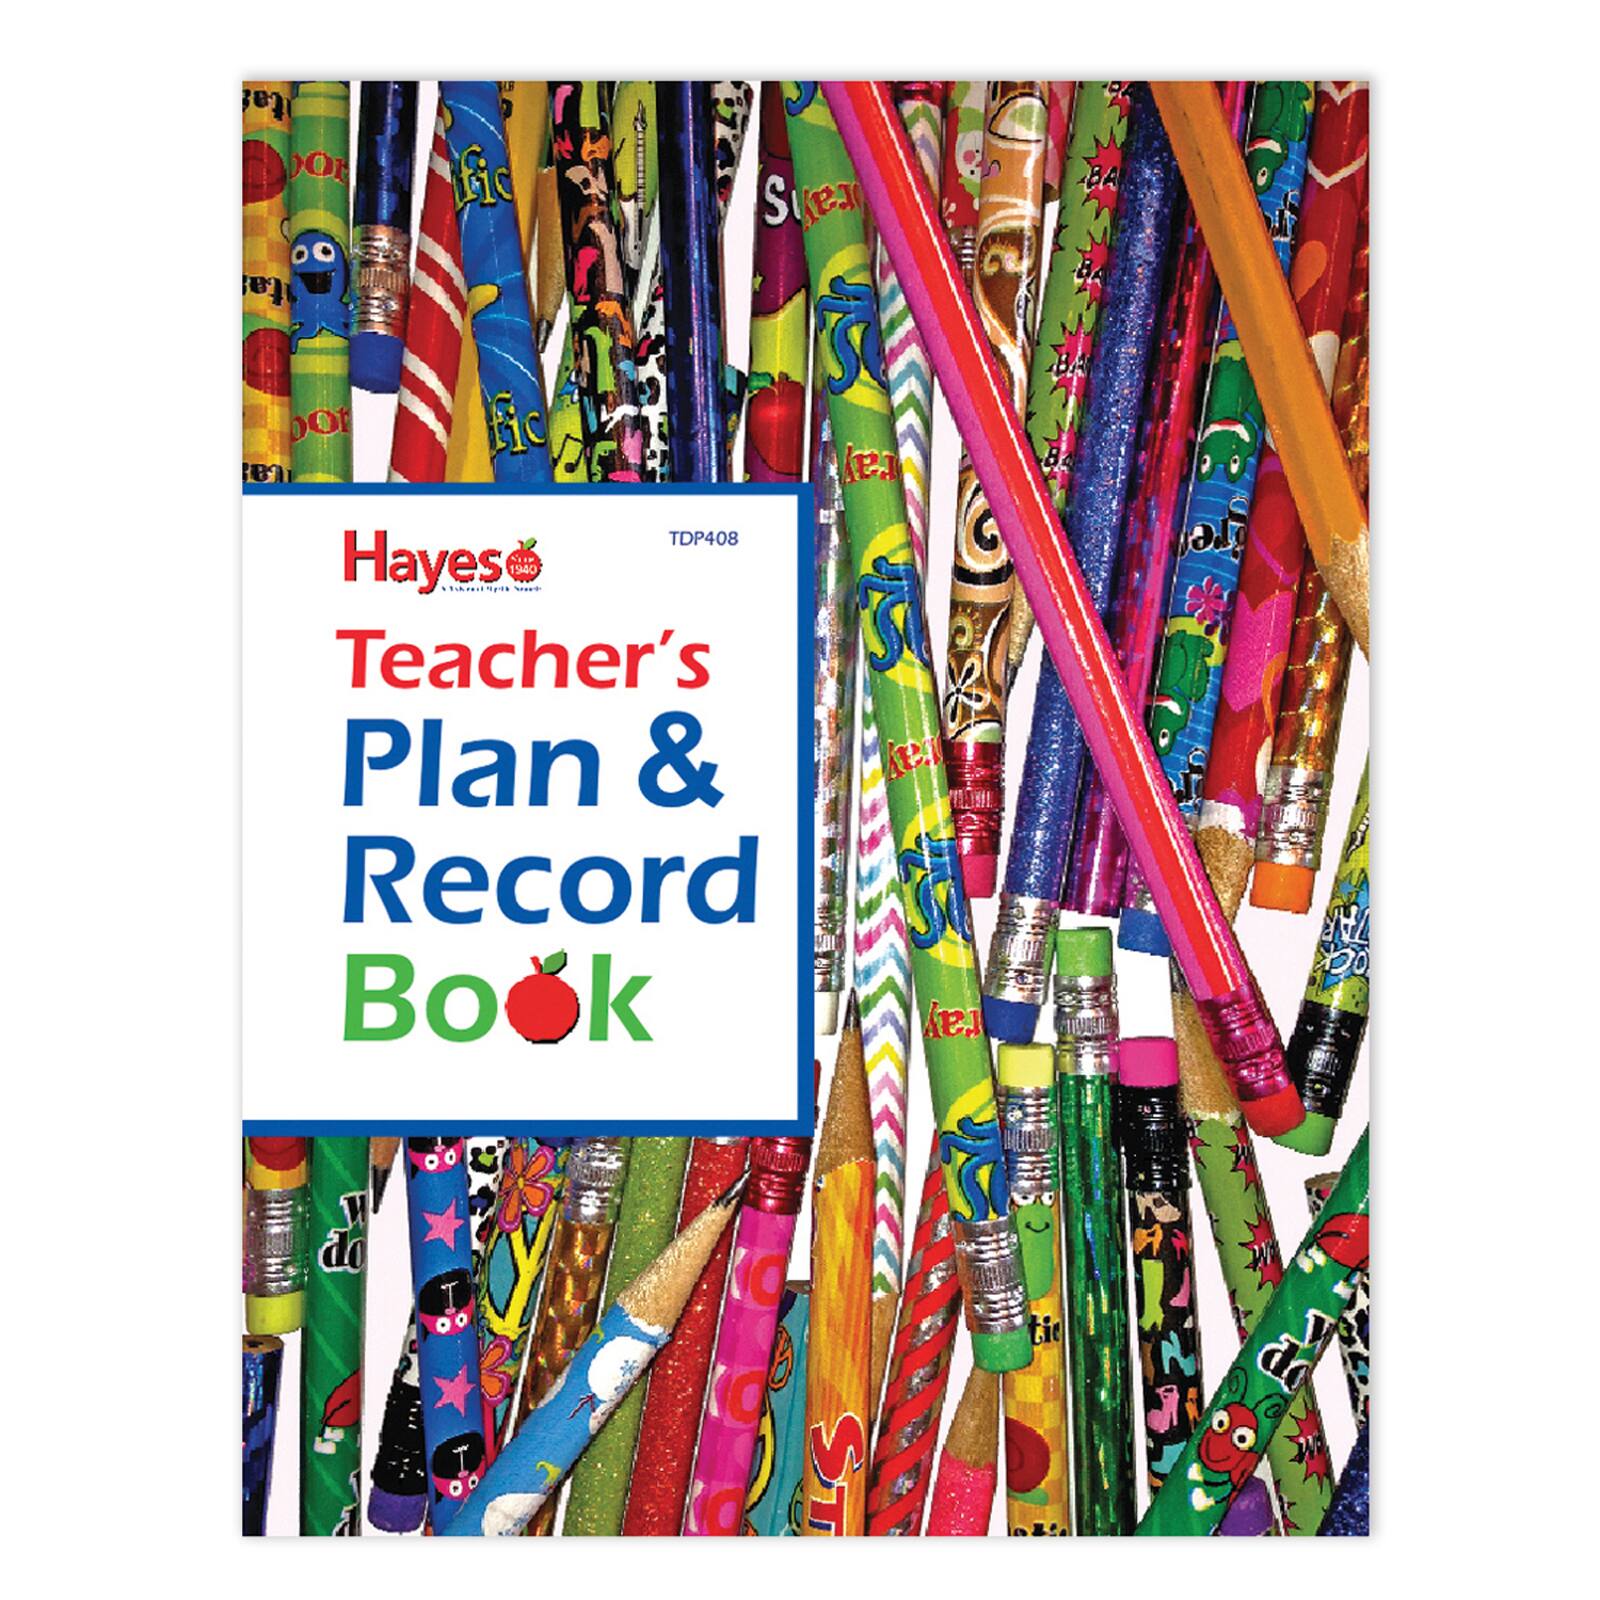 Purchase the Hayes Teacher's Plan & Record Book at Michaels